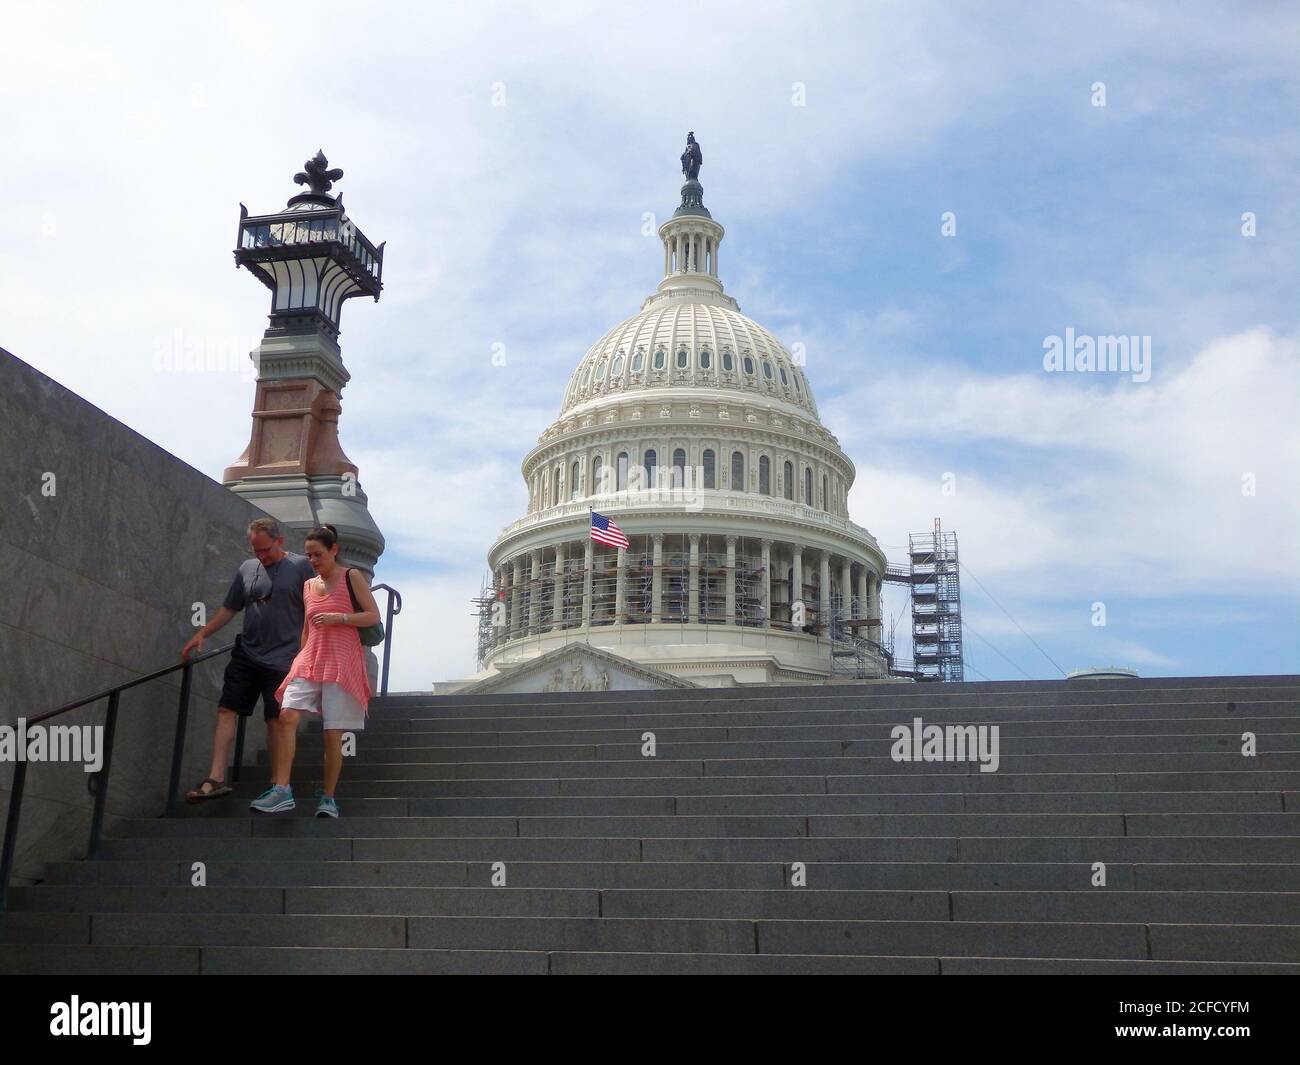 Two tourists walk down the stairs with The United States Capitol Building in the background, Washington DC, United States Stock Photo